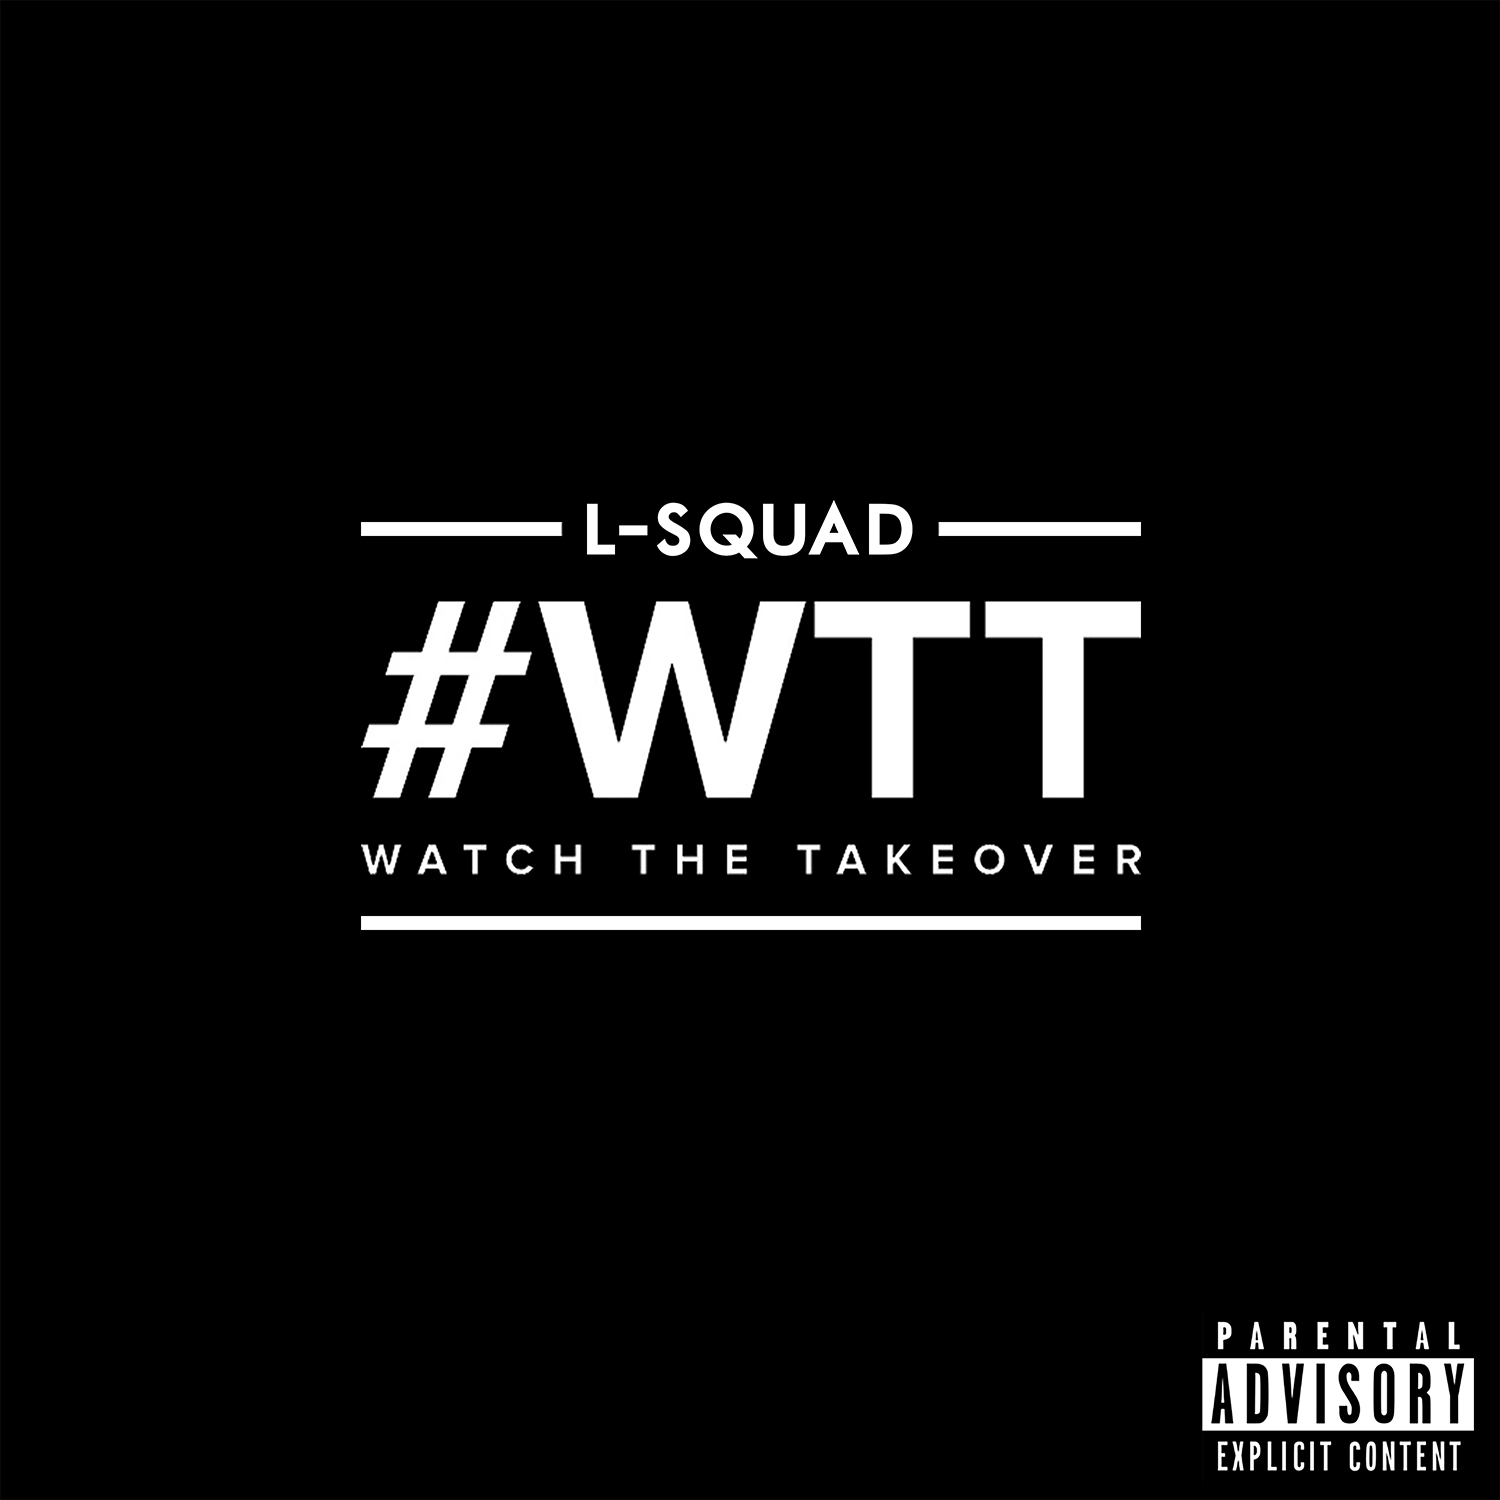 #WTT: Watch The Takeover